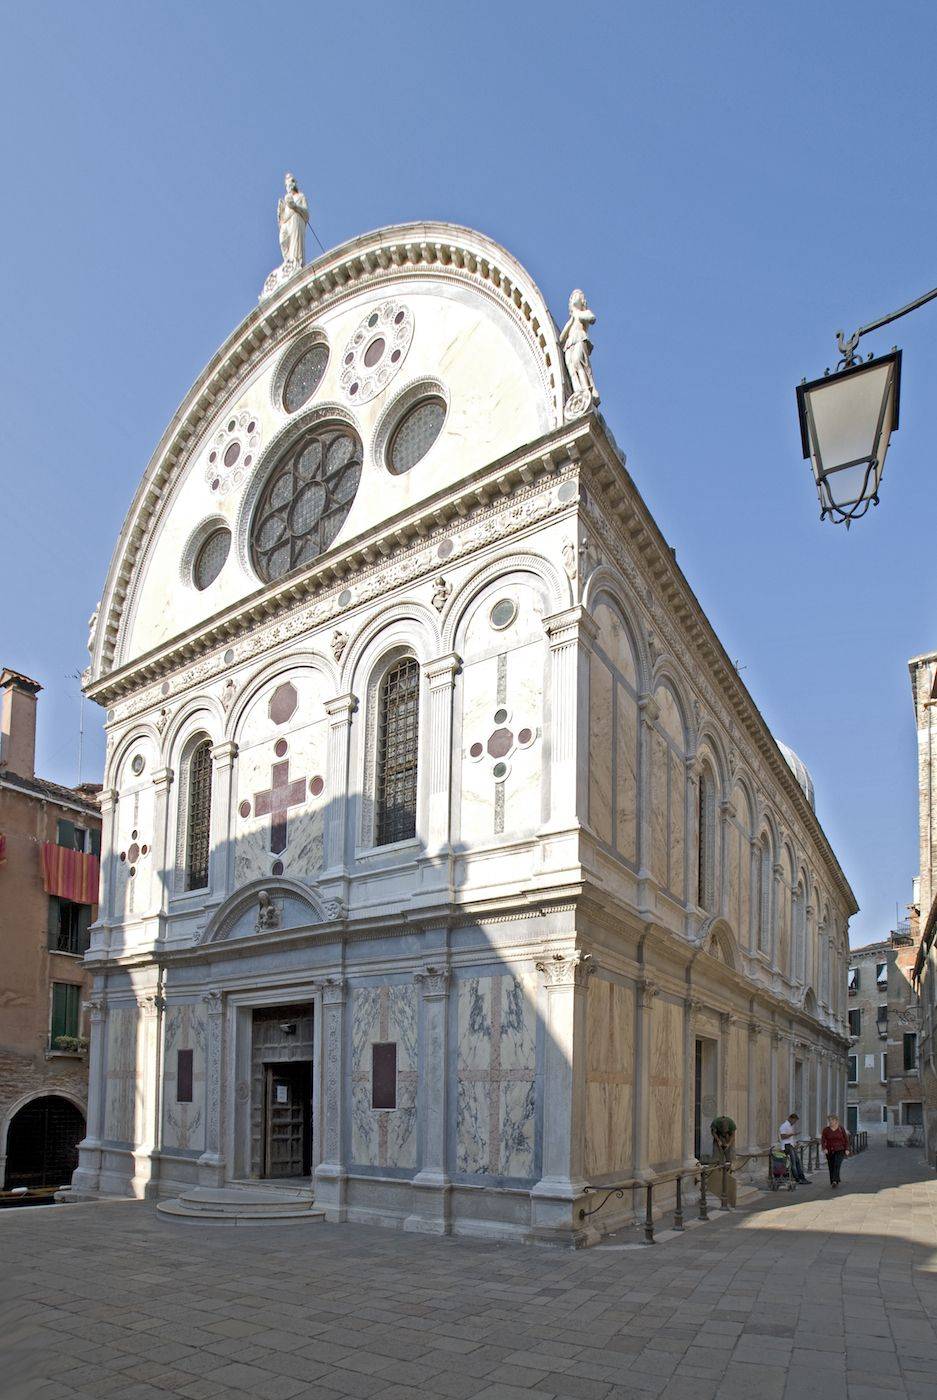 surroundings: the so called Chiesa dei Miracoli is a small treasure